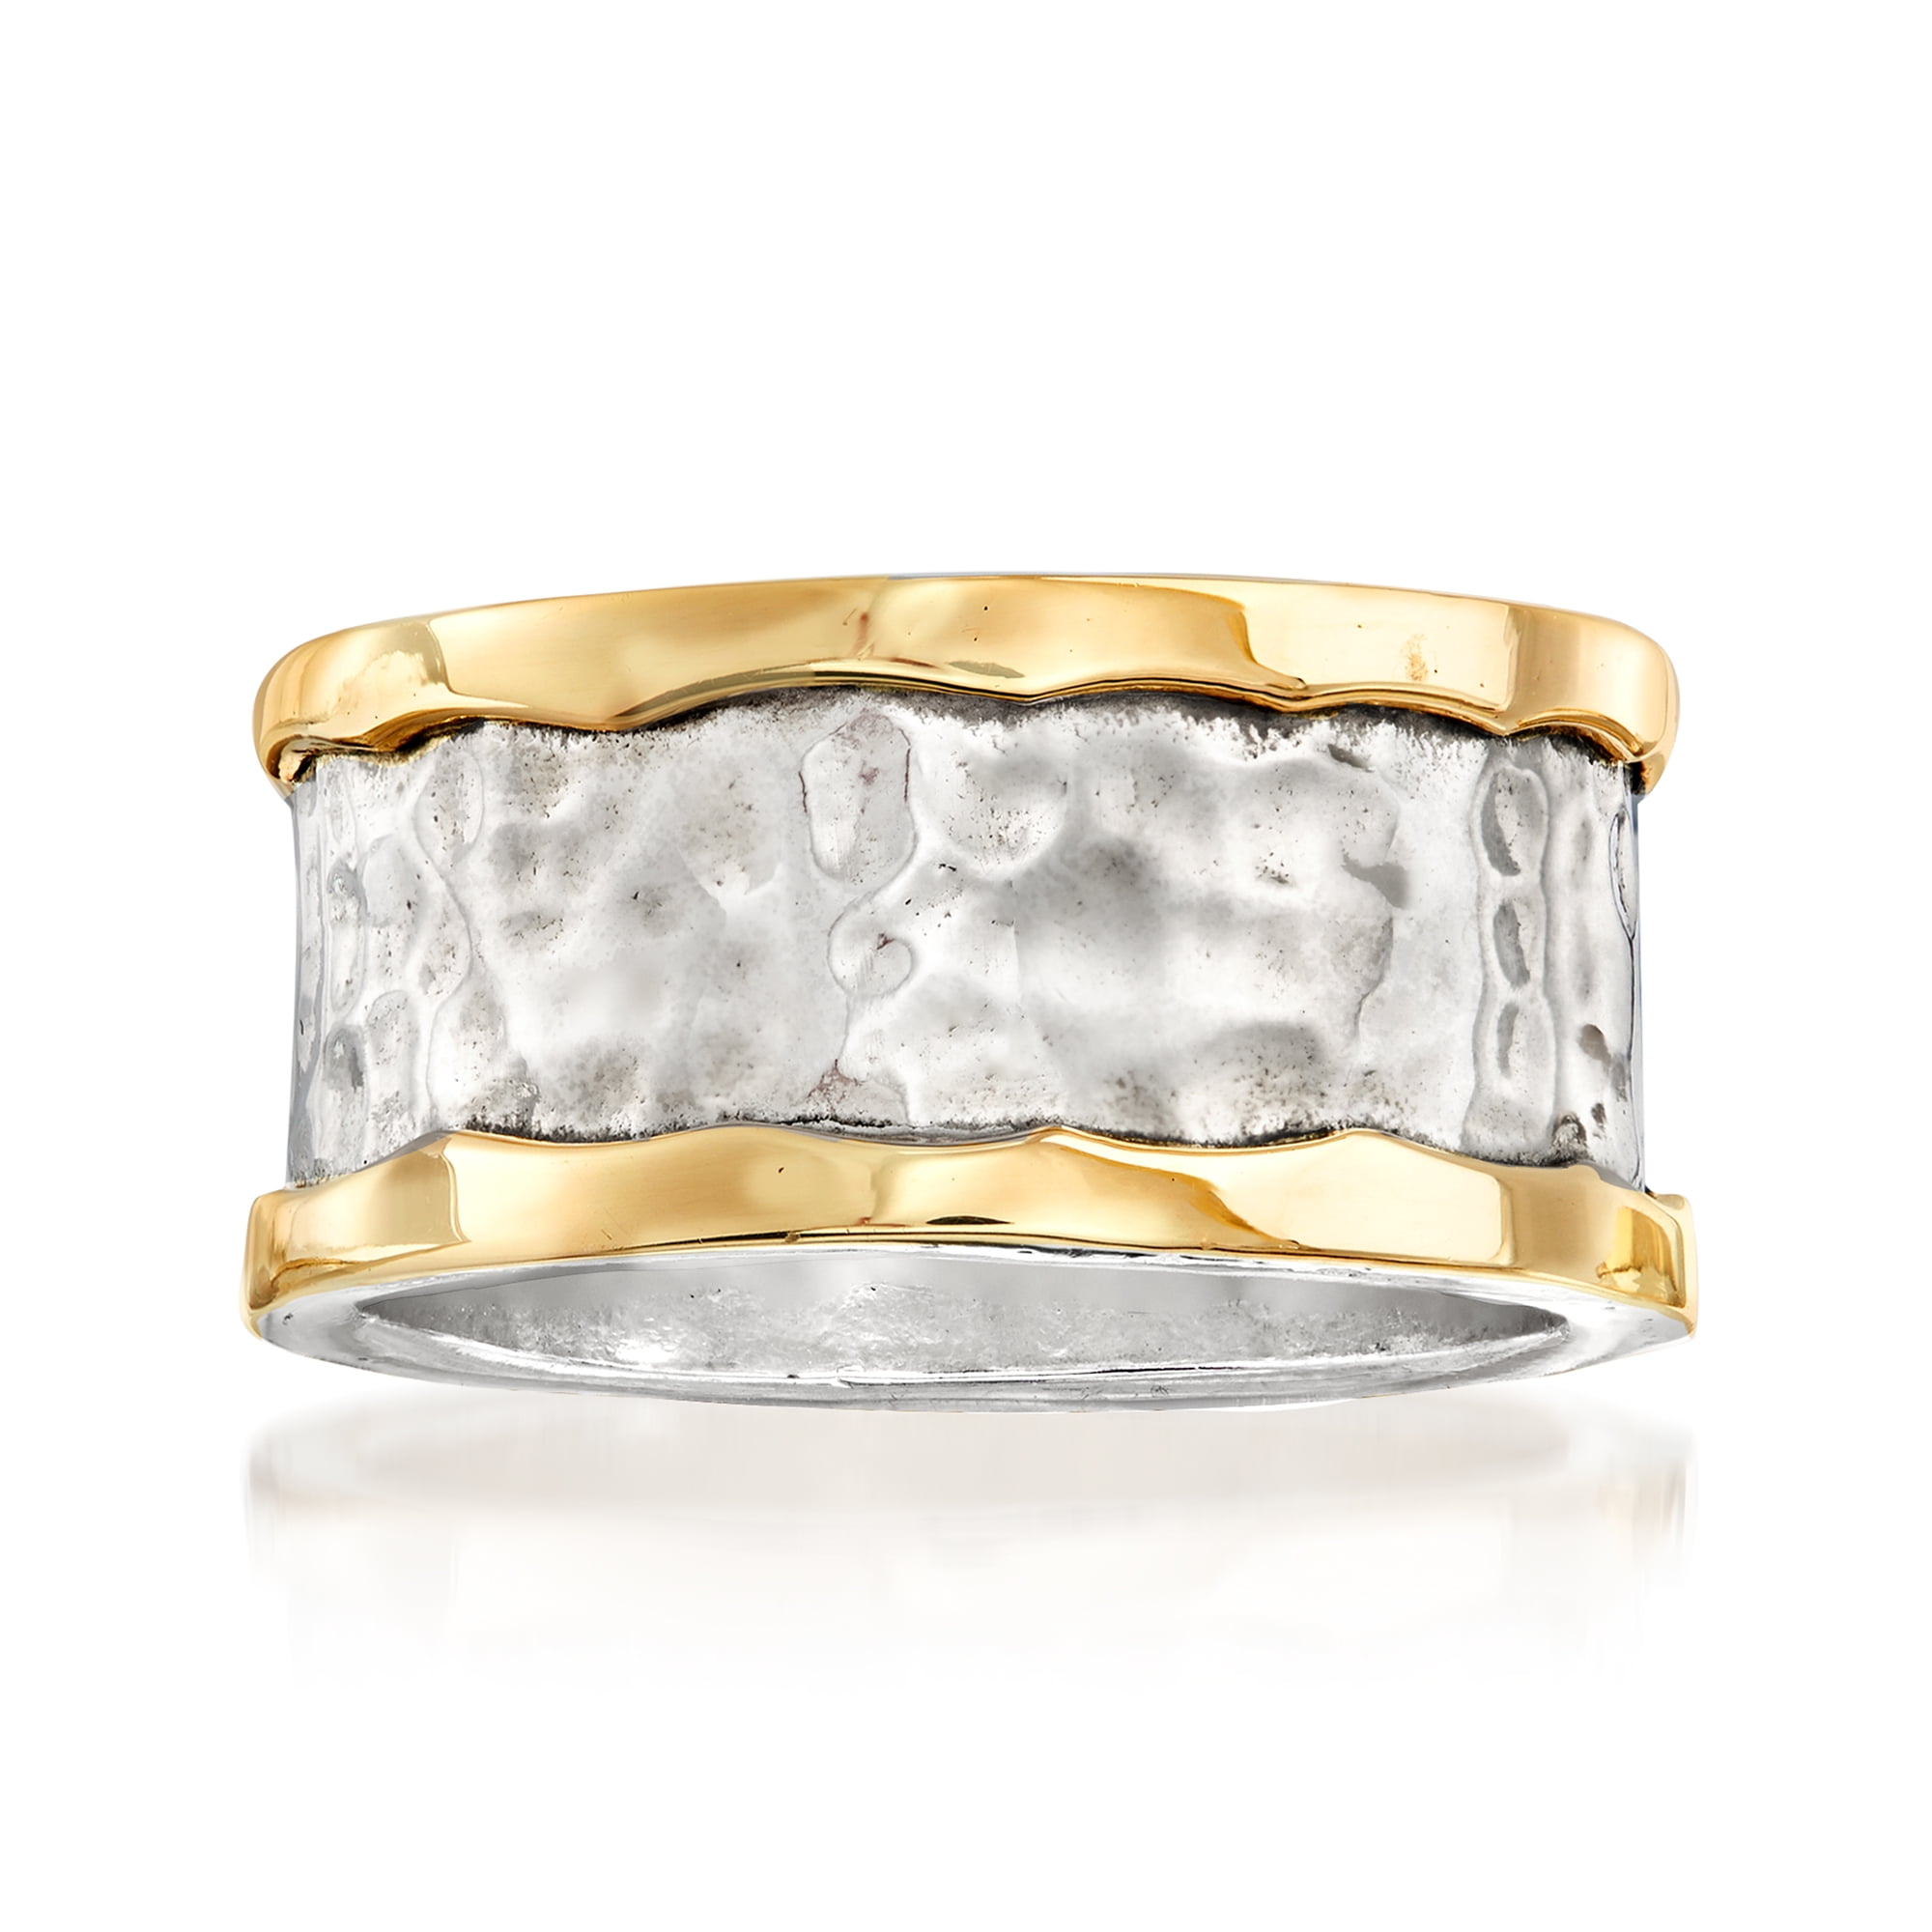 Ross-Simons Sterling Silver and 14kt Yellow Gold Hammered Ring